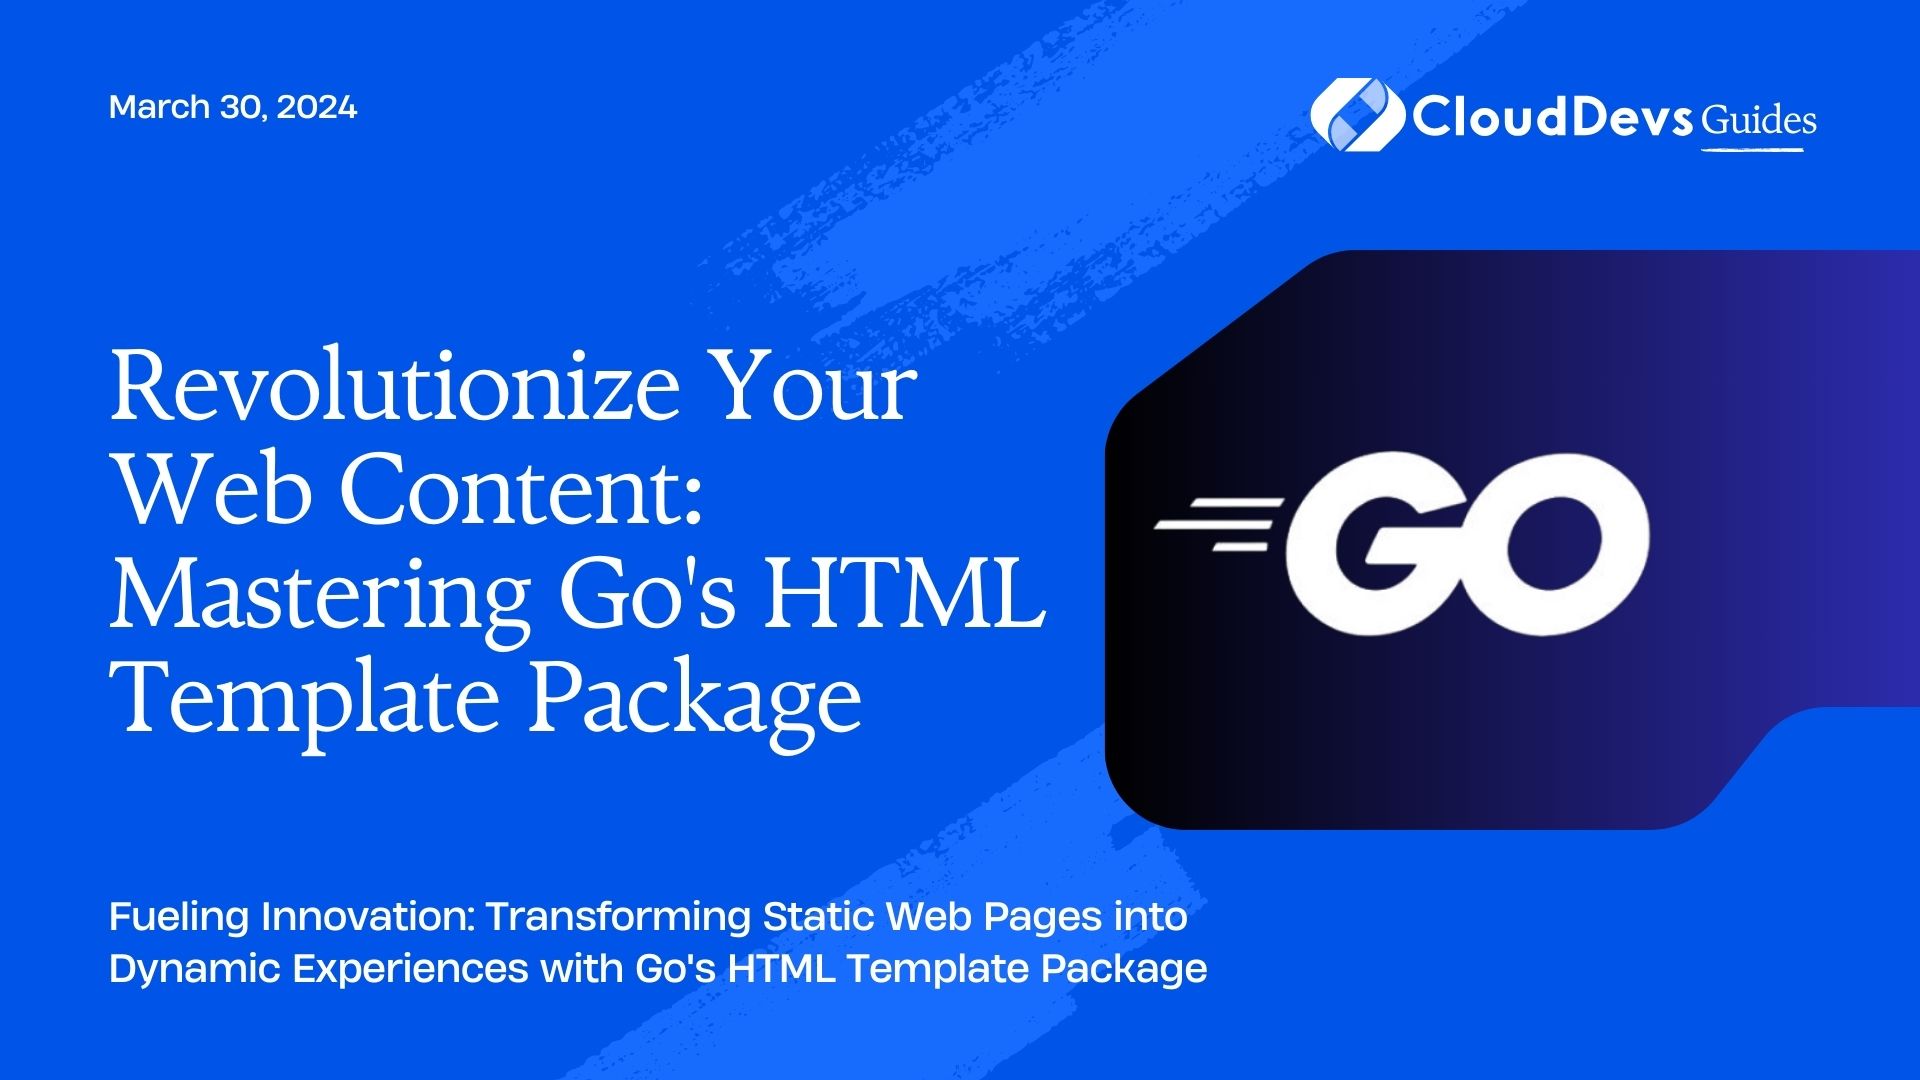 Revolutionize Your Web Content: Mastering Go's HTML Template Package